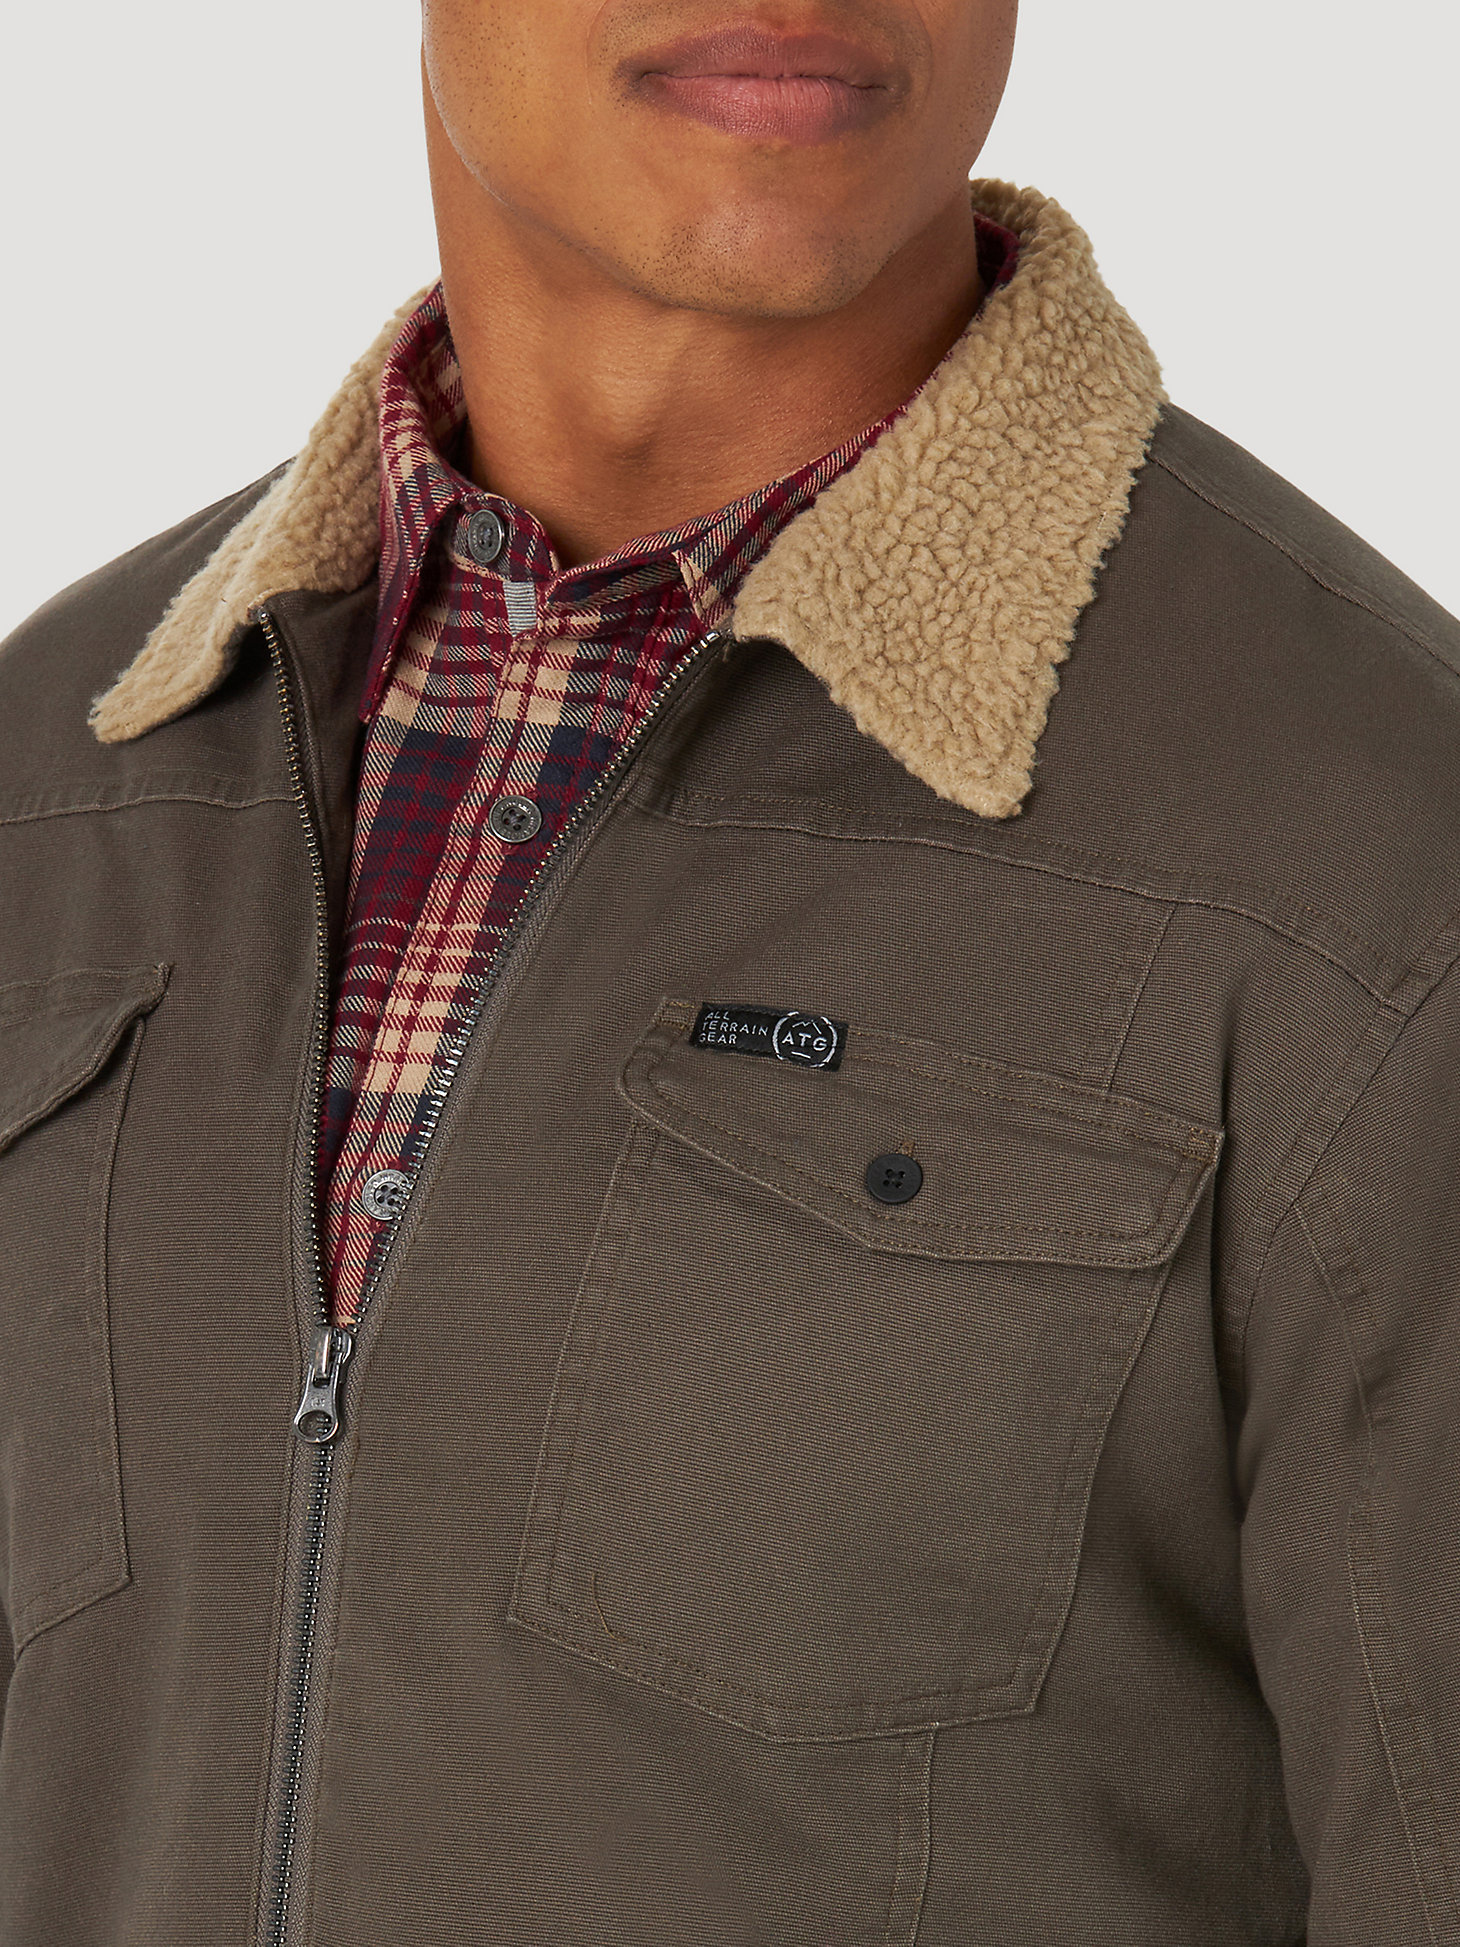 ATG by Wrangler™ Men's Sherpa Lined Canvas Jacket in Major Brown alternative view 4